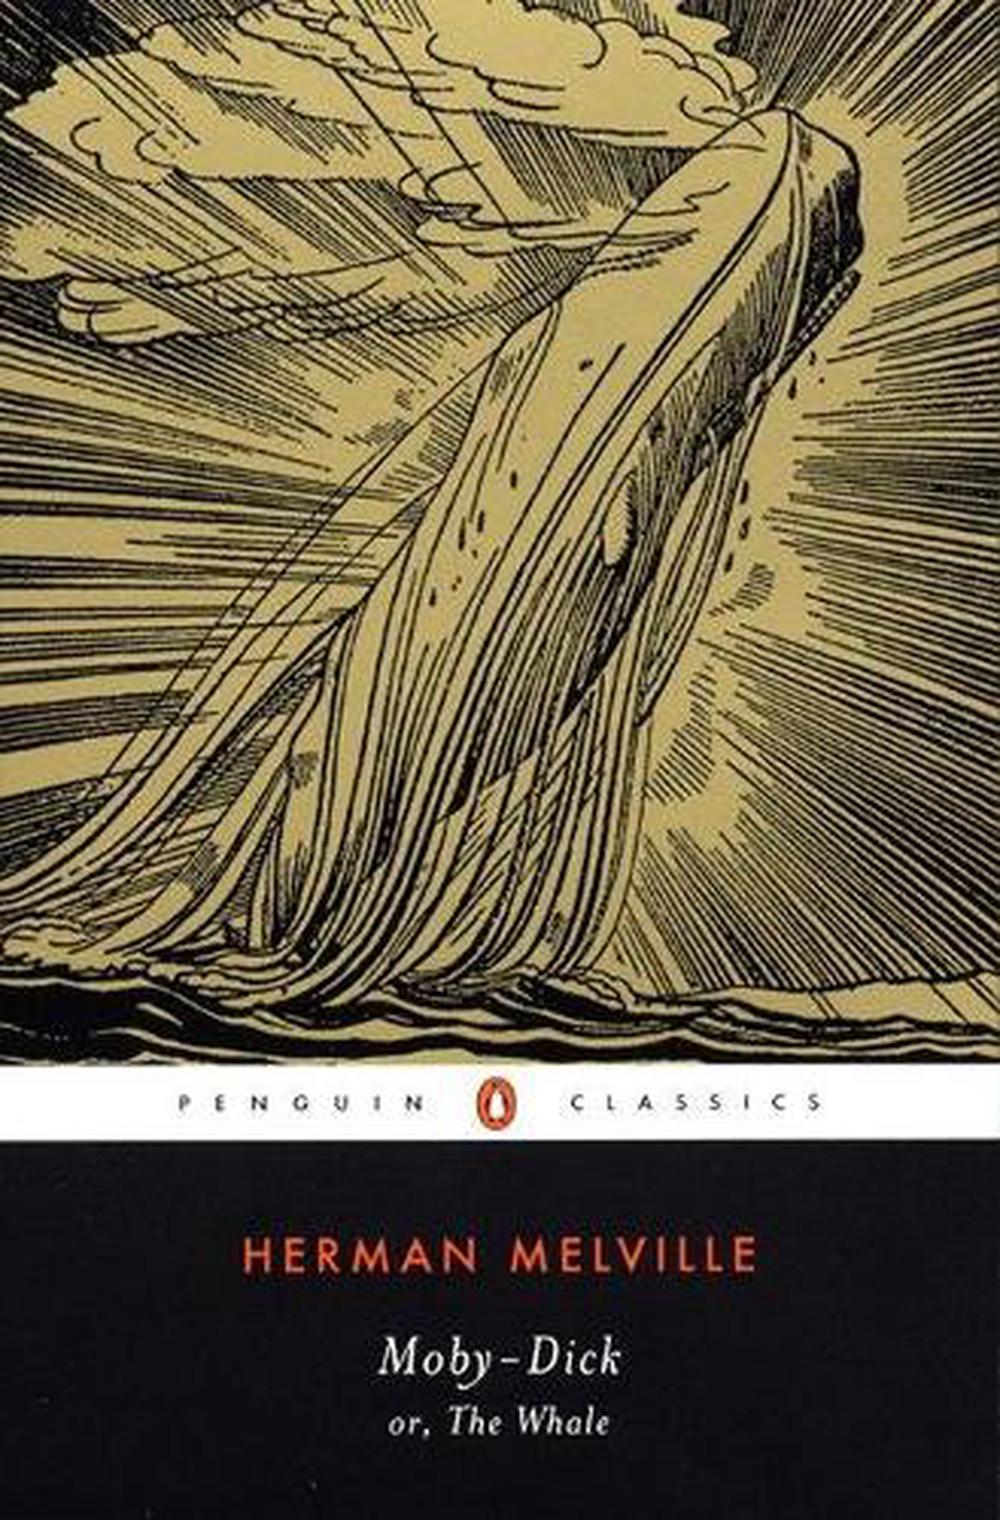 Moby Dick by Herman Melville: stock image of front cover.